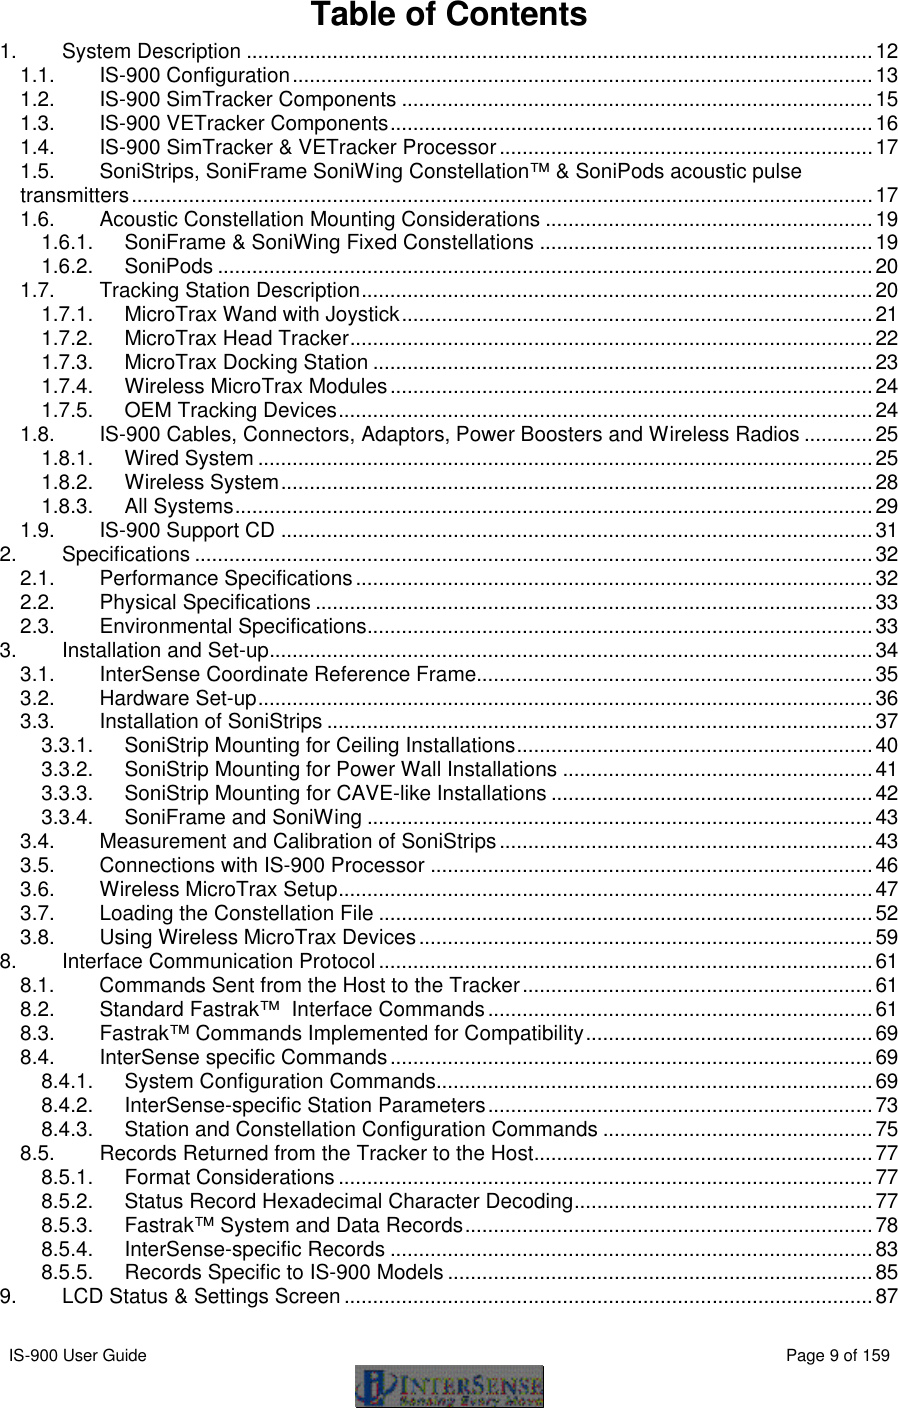  IS-900 User Guide                                                                                                                                          Page 9 of 159  Table of Contents 1. System Description .............................................................................................................12 1.1. IS-900 Configuration.....................................................................................................13 1.2. IS-900 SimTracker Components ..................................................................................15 1.3. IS-900 VETracker Components....................................................................................16 1.4. IS-900 SimTracker &amp; VETracker Processor.................................................................17 1.5. SoniStrips, SoniFrame SoniWing Constellation™ &amp; SoniPods acoustic pulse transmitters.................................................................................................................................17 1.6. Acoustic Constellation Mounting Considerations .........................................................19 1.6.1. SoniFrame &amp; SoniWing Fixed Constellations ..........................................................19 1.6.2. SoniPods ..................................................................................................................20 1.7. Tracking Station Description.........................................................................................20 1.7.1. MicroTrax Wand with Joystick..................................................................................21 1.7.2. MicroTrax Head Tracker...........................................................................................22 1.7.3. MicroTrax Docking Station .......................................................................................23 1.7.4. Wireless MicroTrax Modules....................................................................................24 1.7.5. OEM Tracking Devices.............................................................................................24 1.8. IS-900 Cables, Connectors, Adaptors, Power Boosters and Wireless Radios ............25 1.8.1. Wired System ...........................................................................................................25 1.8.2. Wireless System.......................................................................................................28 1.8.3. All Systems...............................................................................................................29 1.9. IS-900 Support CD .......................................................................................................31 2. Specifications ......................................................................................................................32 2.1. Performance Specifications..........................................................................................32 2.2. Physical Specifications .................................................................................................33 2.3. Environmental Specifications........................................................................................33 3. Installation and Set-up.........................................................................................................34 3.1. InterSense Coordinate Reference Frame.....................................................................35 3.2. Hardware Set-up...........................................................................................................36 3.3. Installation of SoniStrips ...............................................................................................37 3.3.1. SoniStrip Mounting for Ceiling Installations..............................................................40 3.3.2. SoniStrip Mounting for Power Wall Installations ......................................................41 3.3.3. SoniStrip Mounting for CAVE-like Installations ........................................................42 3.3.4. SoniFrame and SoniWing ........................................................................................43 3.4. Measurement and Calibration of SoniStrips.................................................................43 3.5. Connections with IS-900 Processor .............................................................................46 3.6. Wireless MicroTrax Setup.............................................................................................47 3.7. Loading the Constellation File ......................................................................................52 3.8. Using Wireless MicroTrax Devices...............................................................................59 8. Interface Communication Protocol ......................................................................................61 8.1. Commands Sent from the Host to the Tracker.............................................................61 8.2. Standard Fastrak™  Interface Commands...................................................................61 8.3. Fastrak™ Commands Implemented for Compatibility..................................................69 8.4. InterSense specific Commands....................................................................................69 8.4.1. System Configuration Commands............................................................................69 8.4.2. InterSense-specific Station Parameters...................................................................73 8.4.3. Station and Constellation Configuration Commands ...............................................75 8.5. Records Returned from the Tracker to the Host...........................................................77 8.5.1. Format Considerations .............................................................................................77 8.5.2. Status Record Hexadecimal Character Decoding....................................................77 8.5.3. Fastrak™ System and Data Records.......................................................................78 8.5.4. InterSense-specific Records ....................................................................................83 8.5.5. Records Specific to IS-900 Models ..........................................................................85 9. LCD Status &amp; Settings Screen ............................................................................................87 